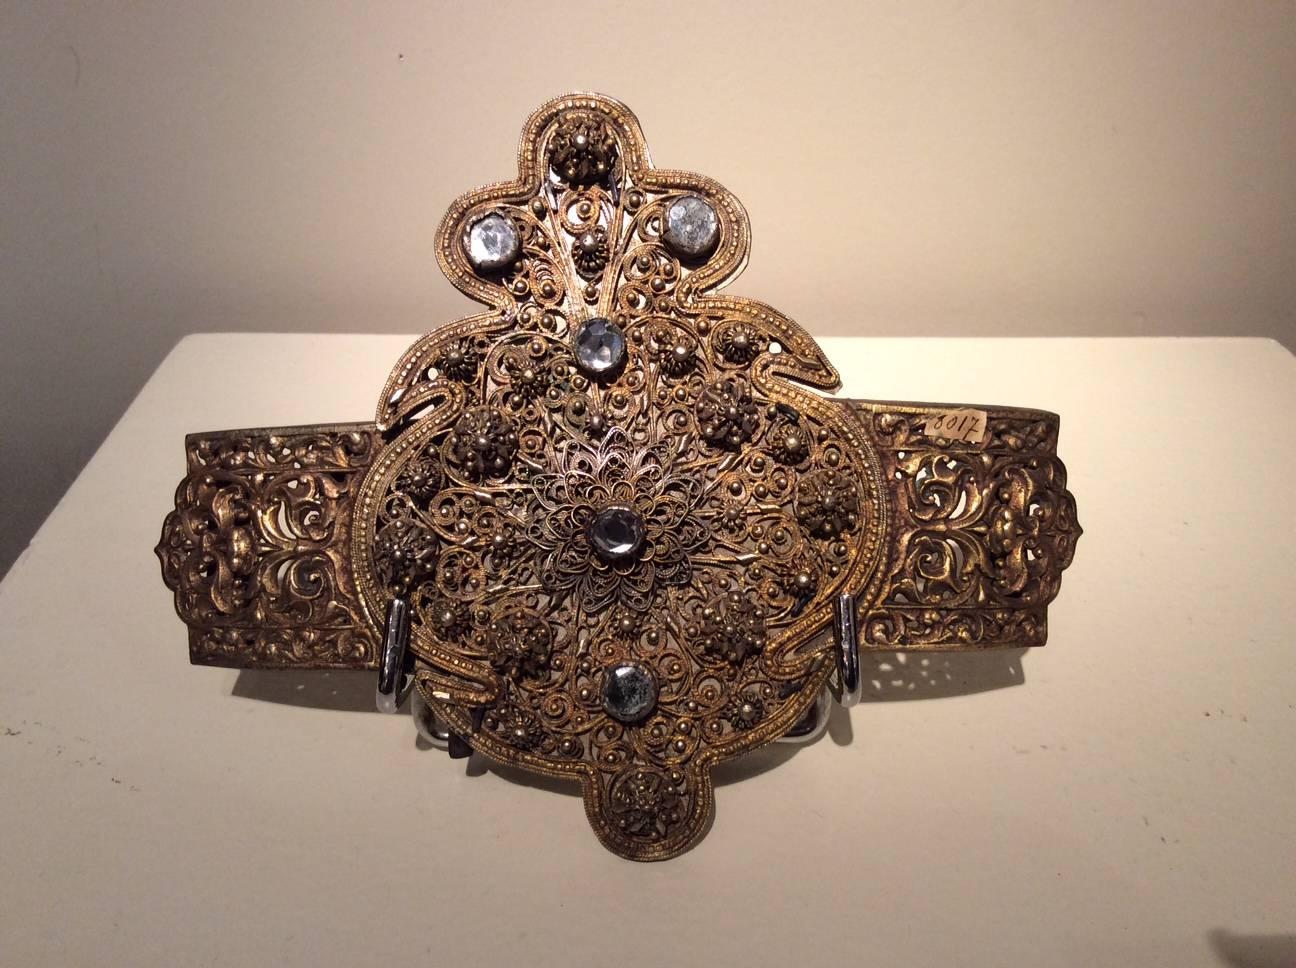 Belt buckle in gold-plated metal, filigree, glass cabochons.
This three-part belt buckle forming a floret is decorated on the sides with floral motifs, glass cabochons imitating the crystal adorn the central filigree part.
Balkans? 19th